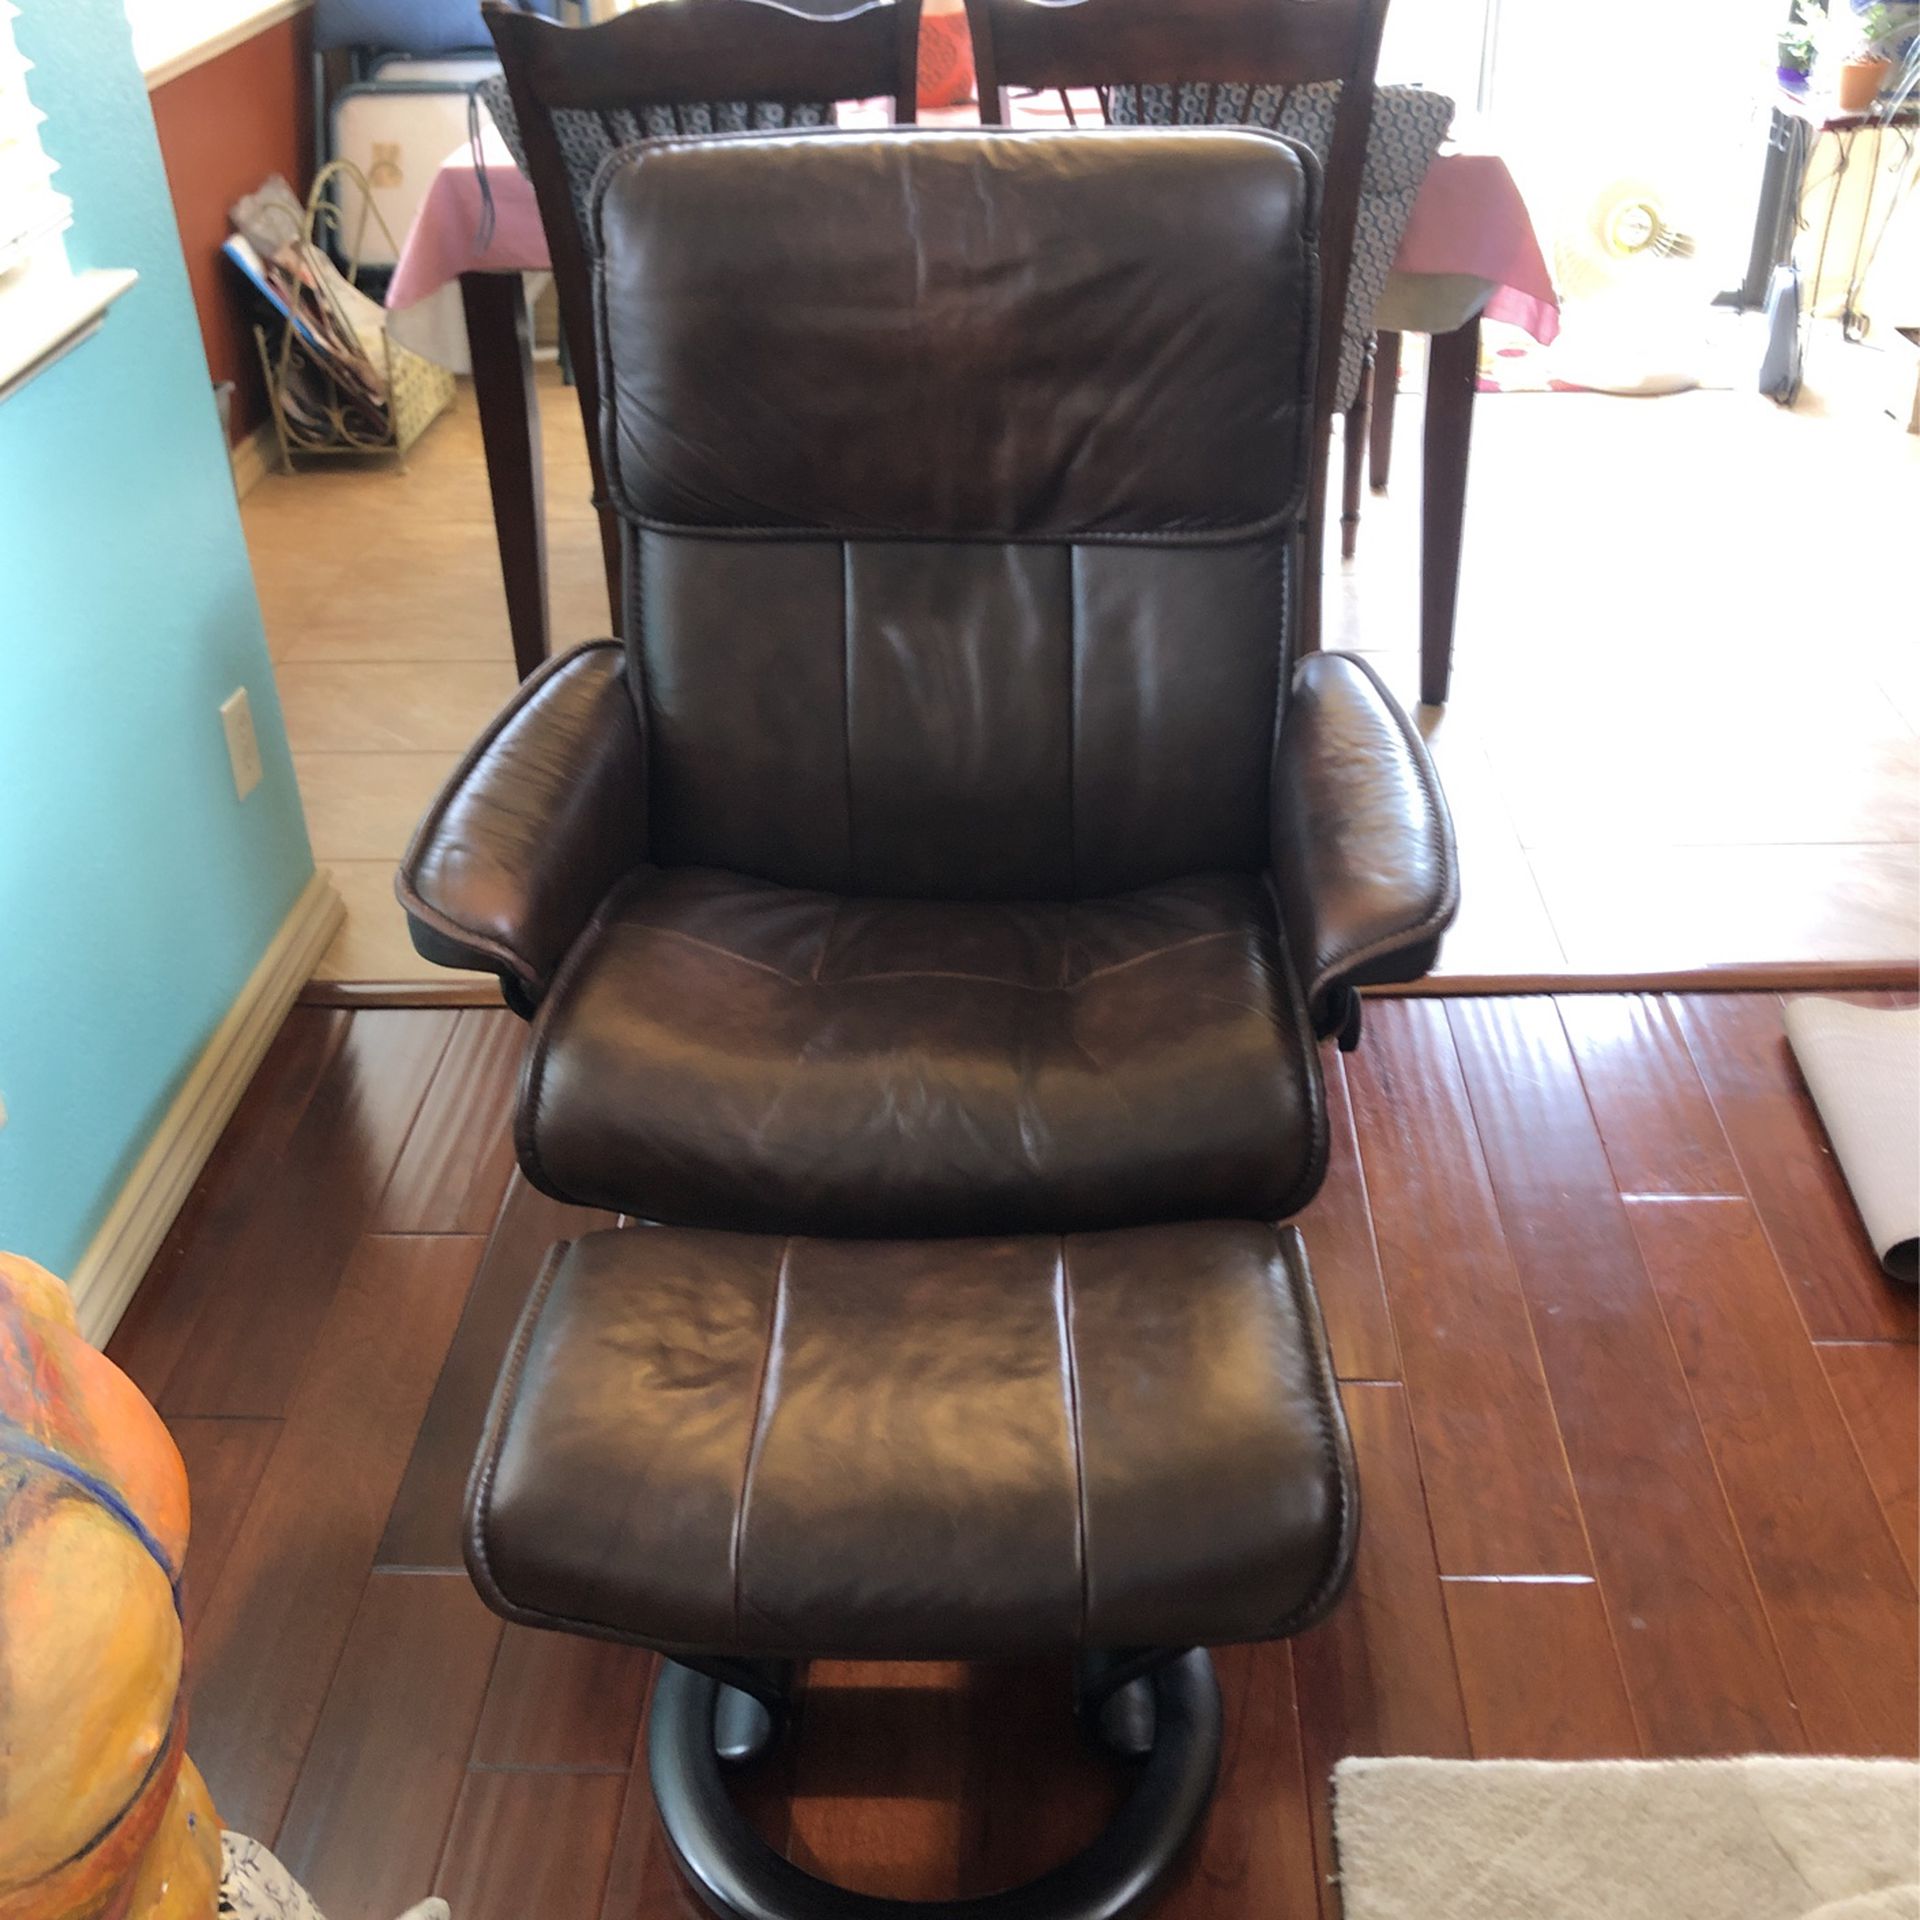 Reclining Stressless chair with ottoman